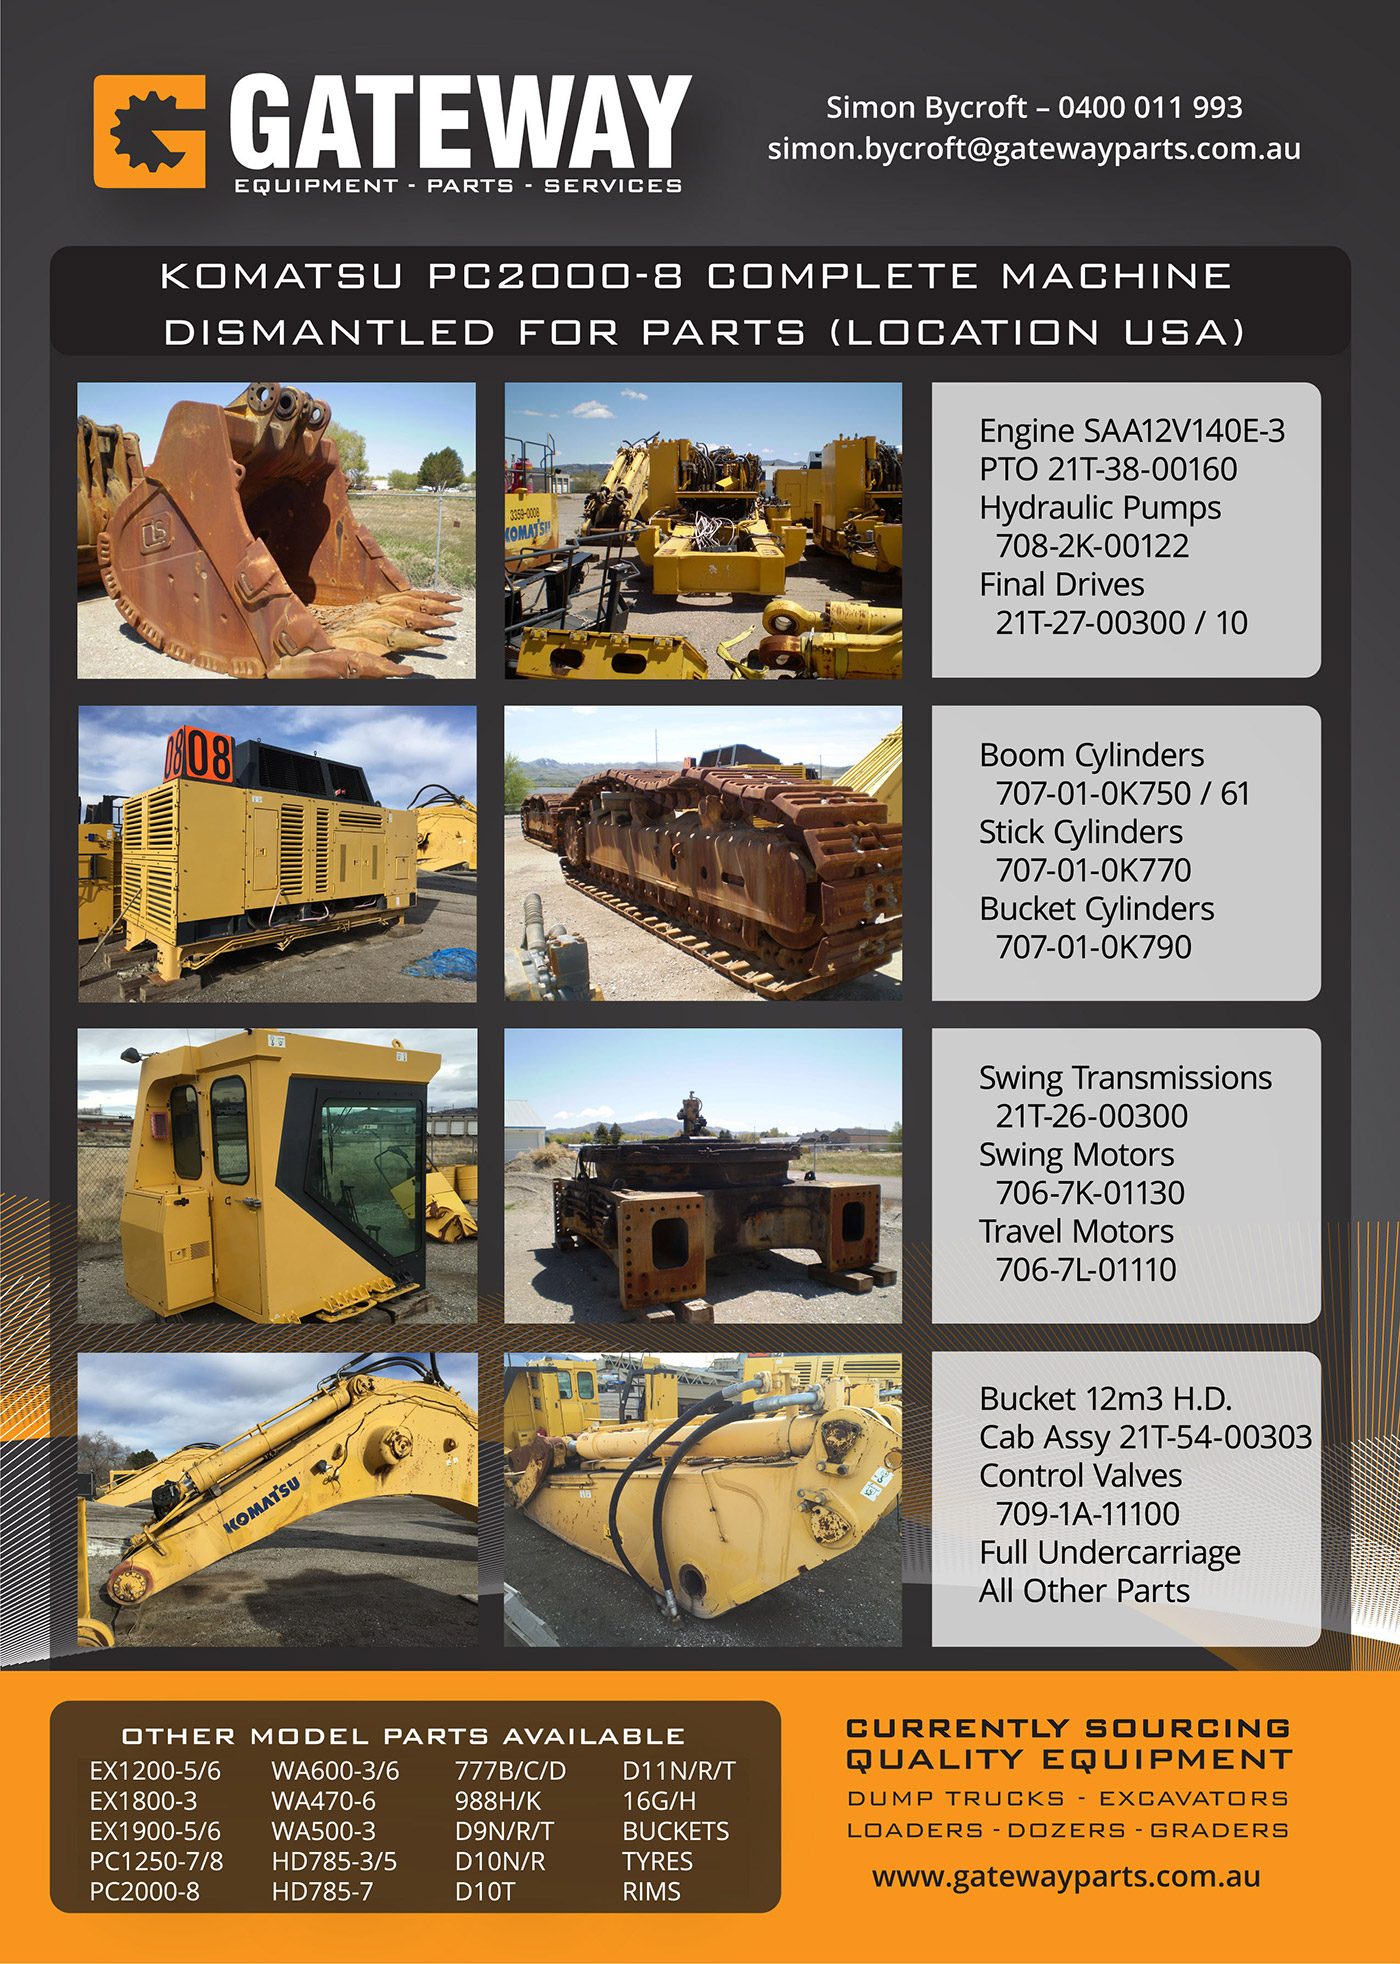 Komatsu PC2000-8 to be Dismantled for Parts